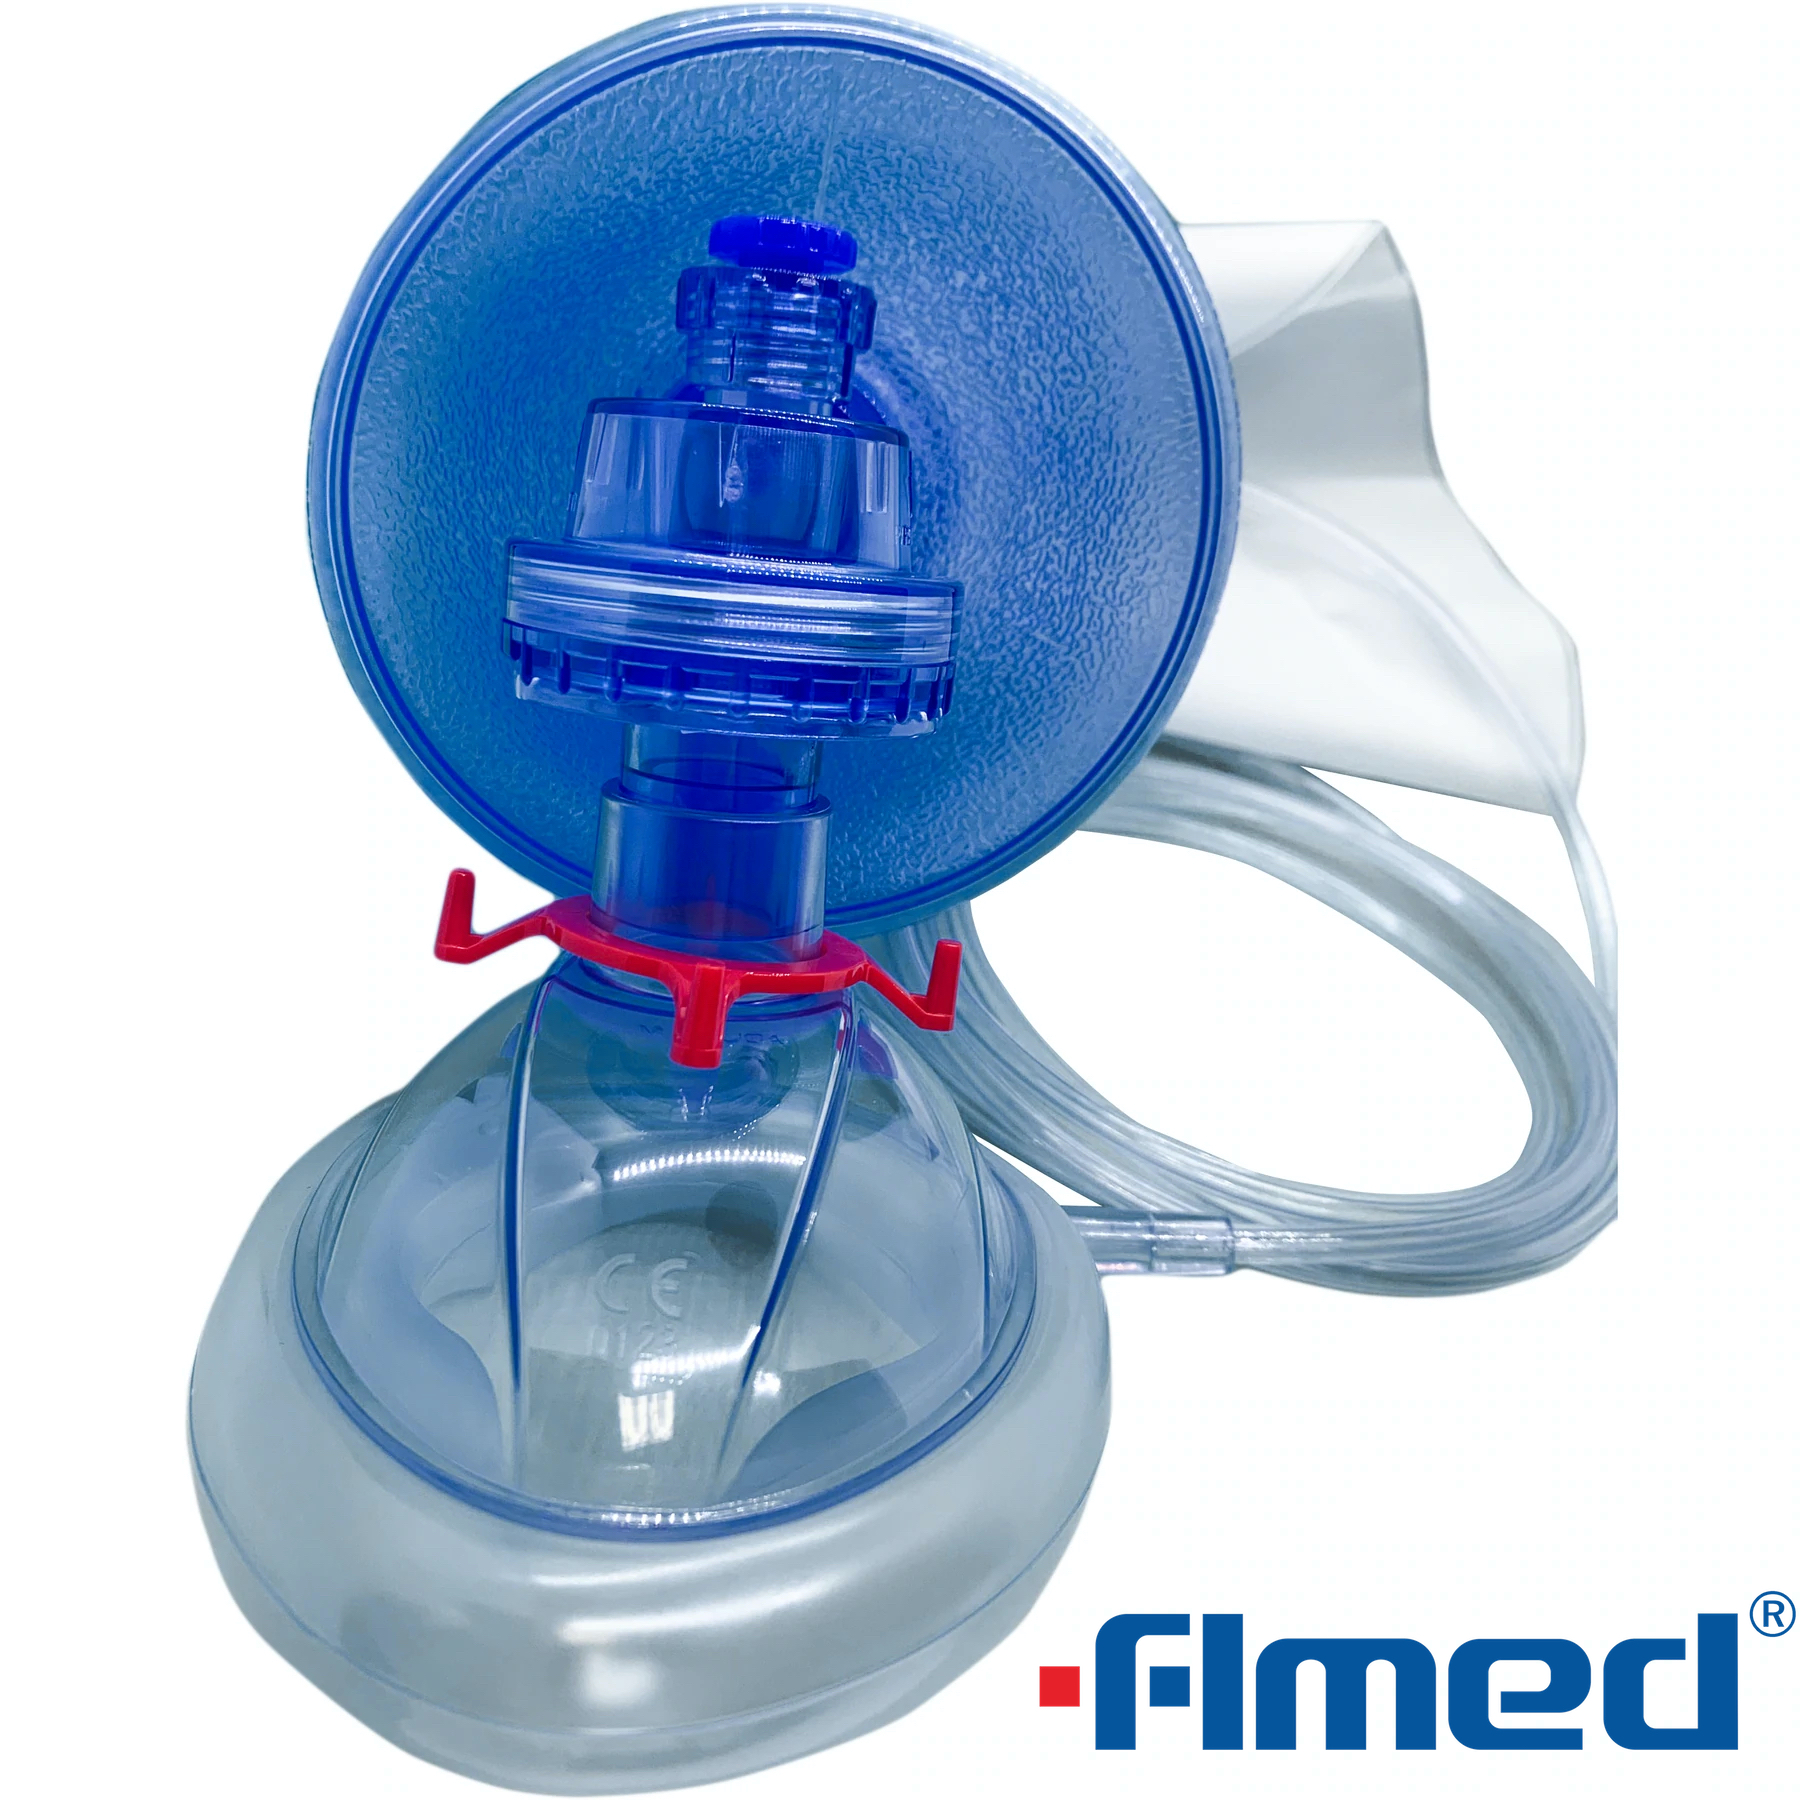 Emergency Silicone Resuscitator first aid kit